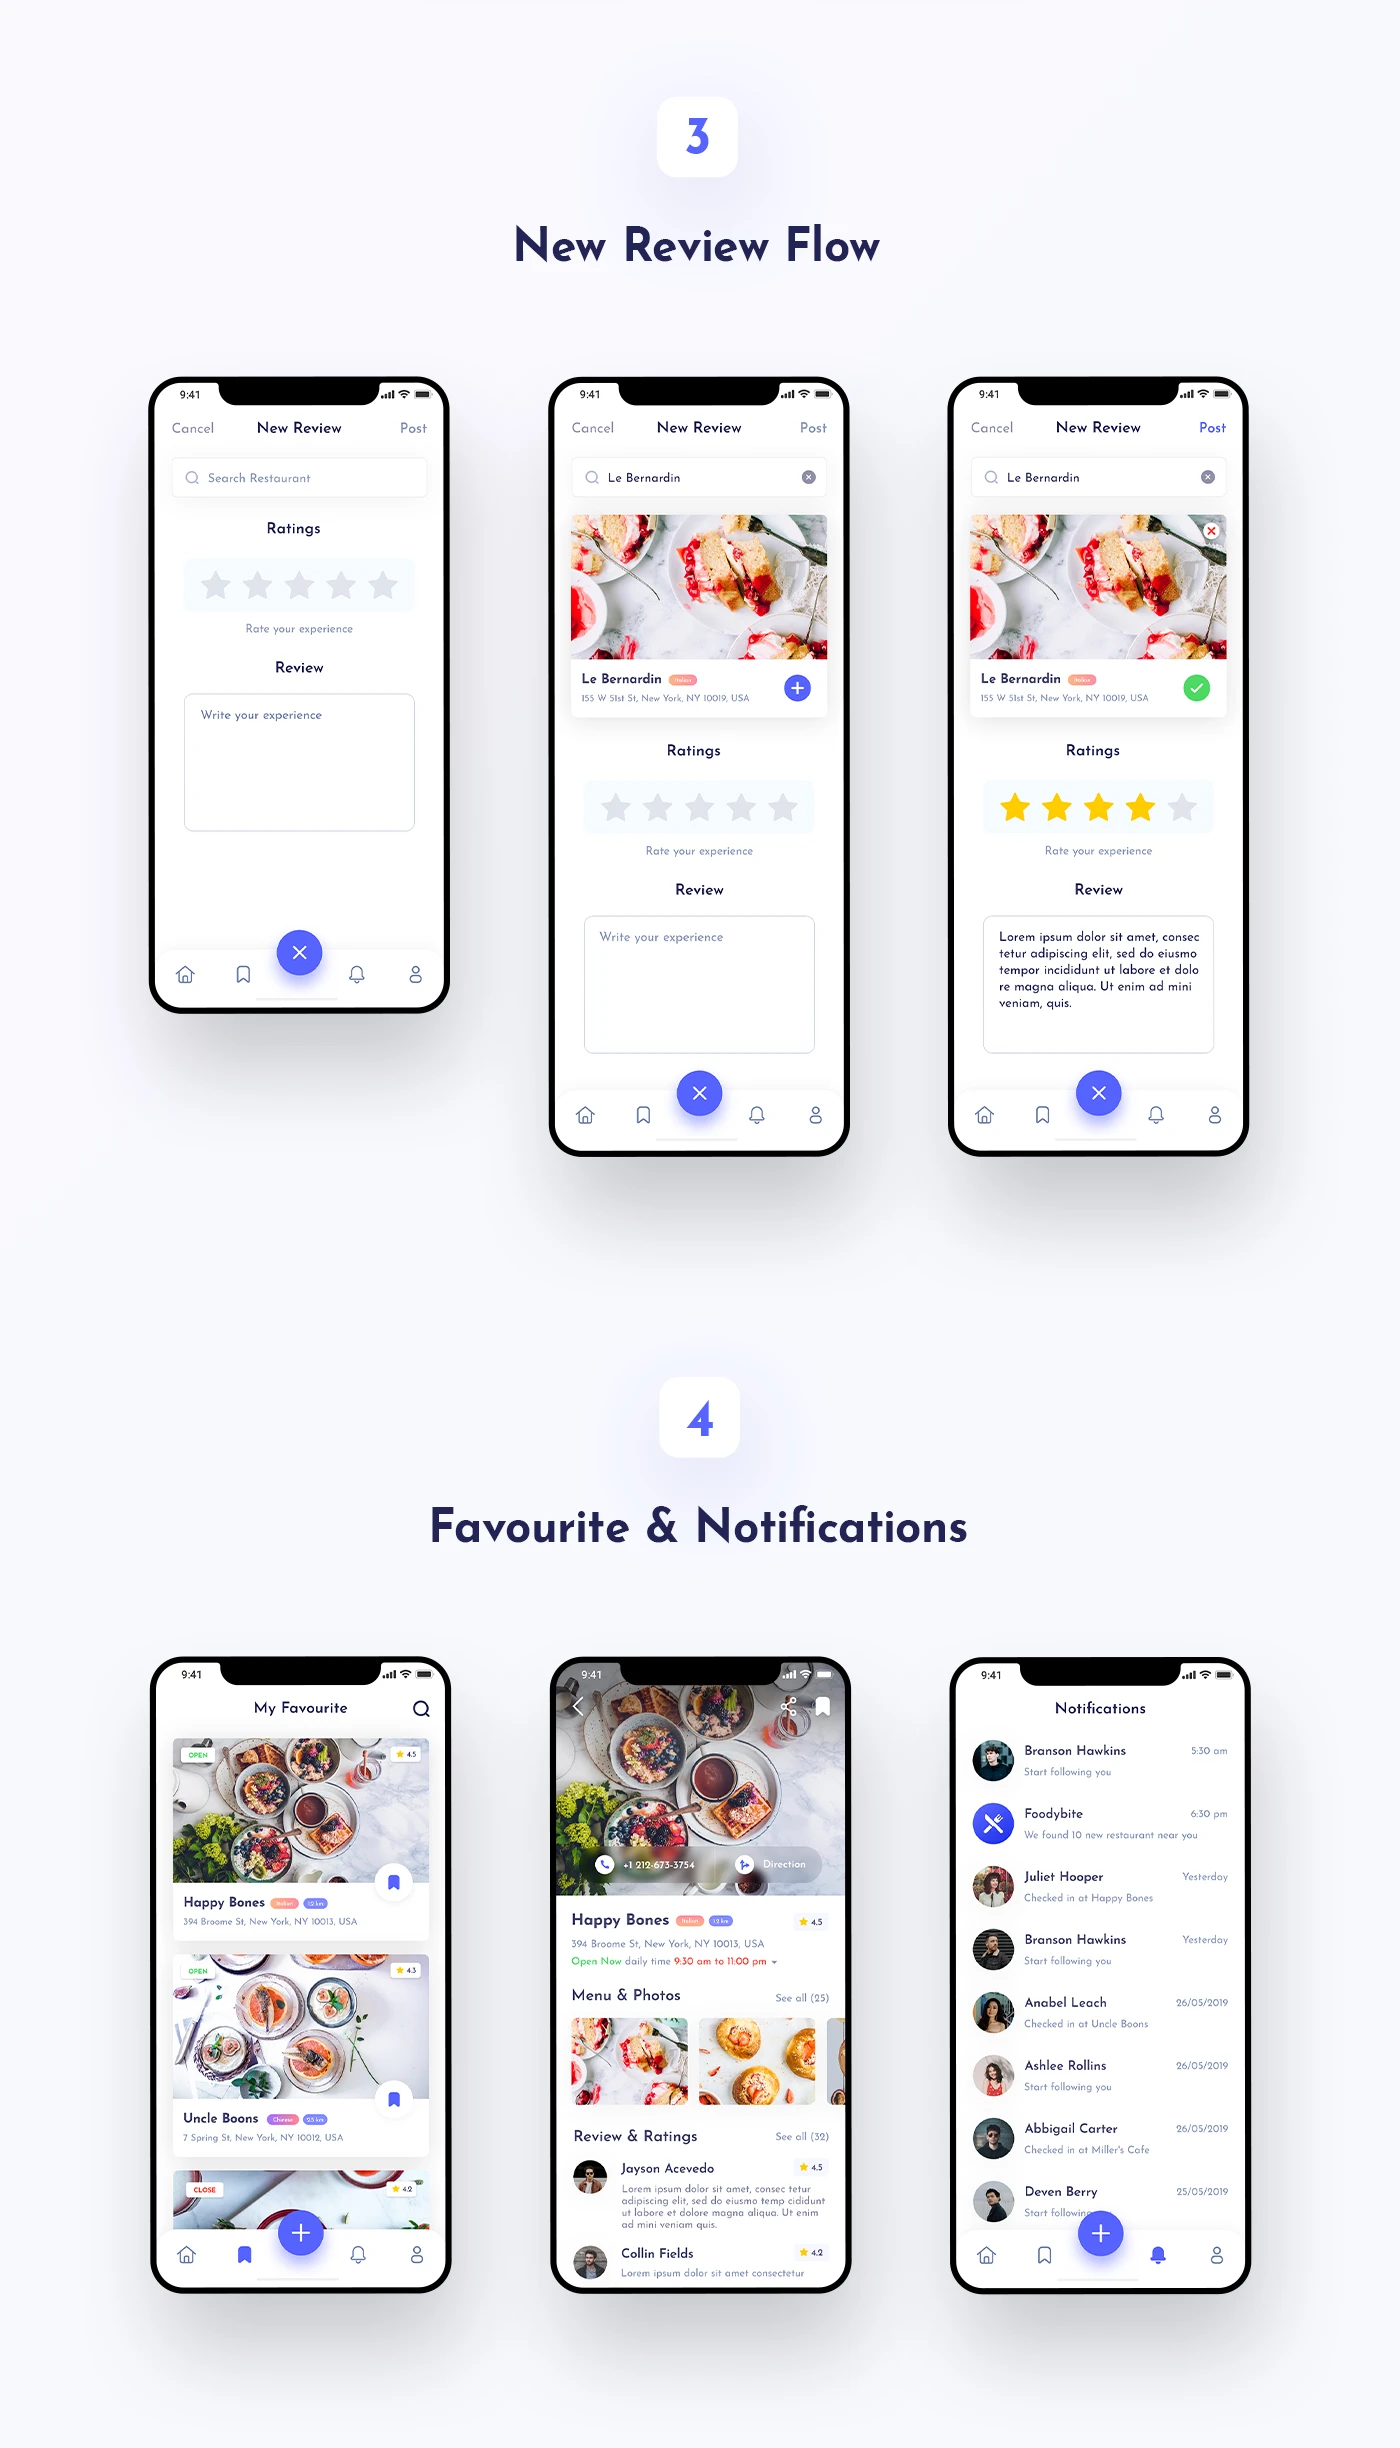 Foodybite - Free UI Kit for Adobe XD - Foodybite is a free UI Kit. It is easy to use for Adobe XD for who want to design an app related to food or restaurant services. The UI Kit pack included more than 30 customizable screens. All screens are fully editable. This UI Kit is free for personal & commercial projects.